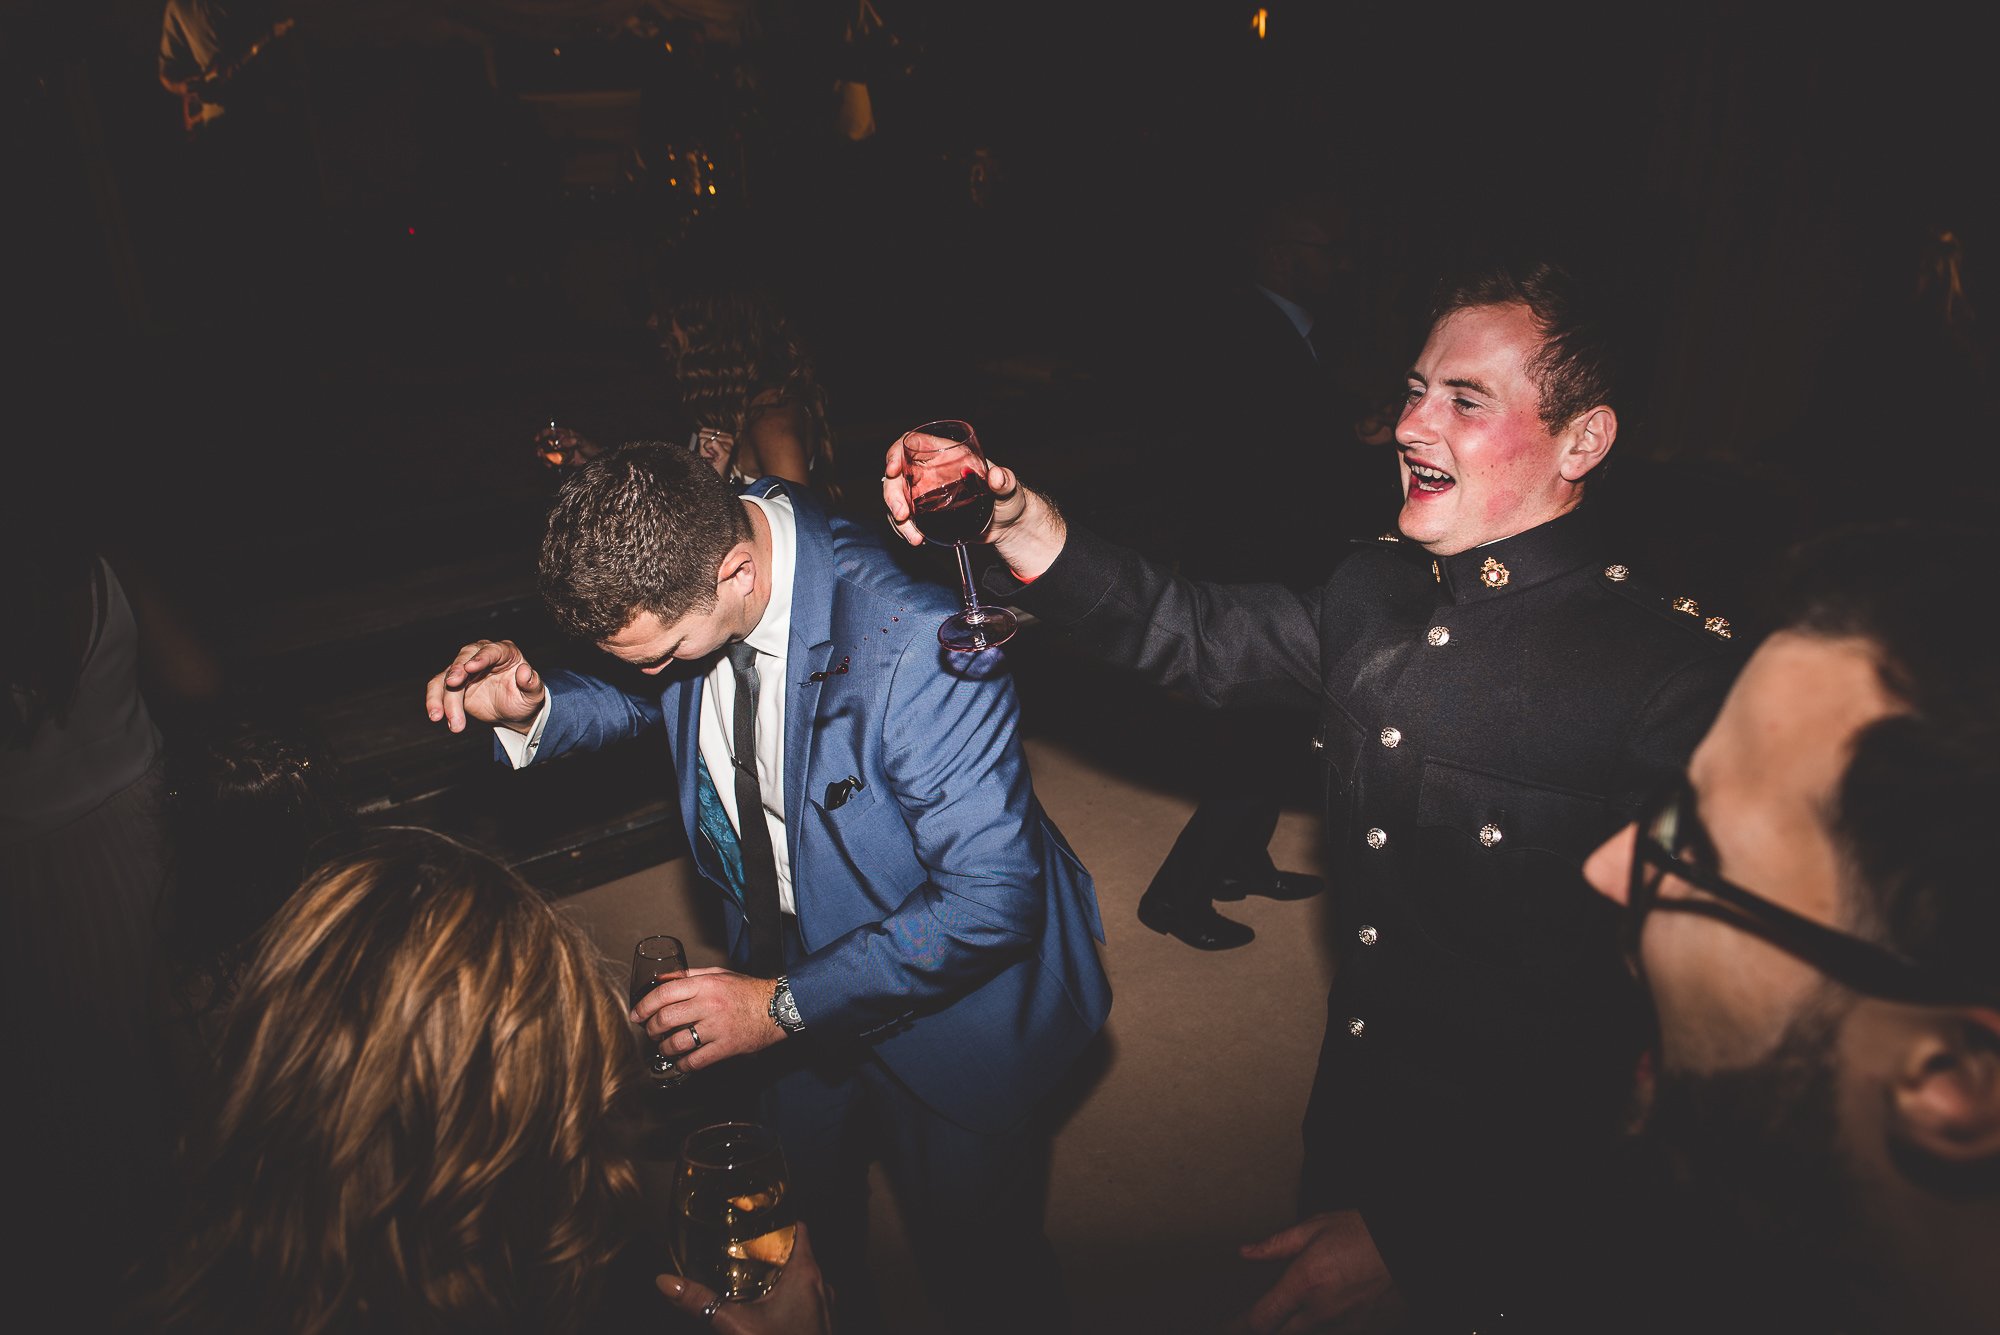 A wedding photographer captures a man in a suit sipping wine at the wedding party.